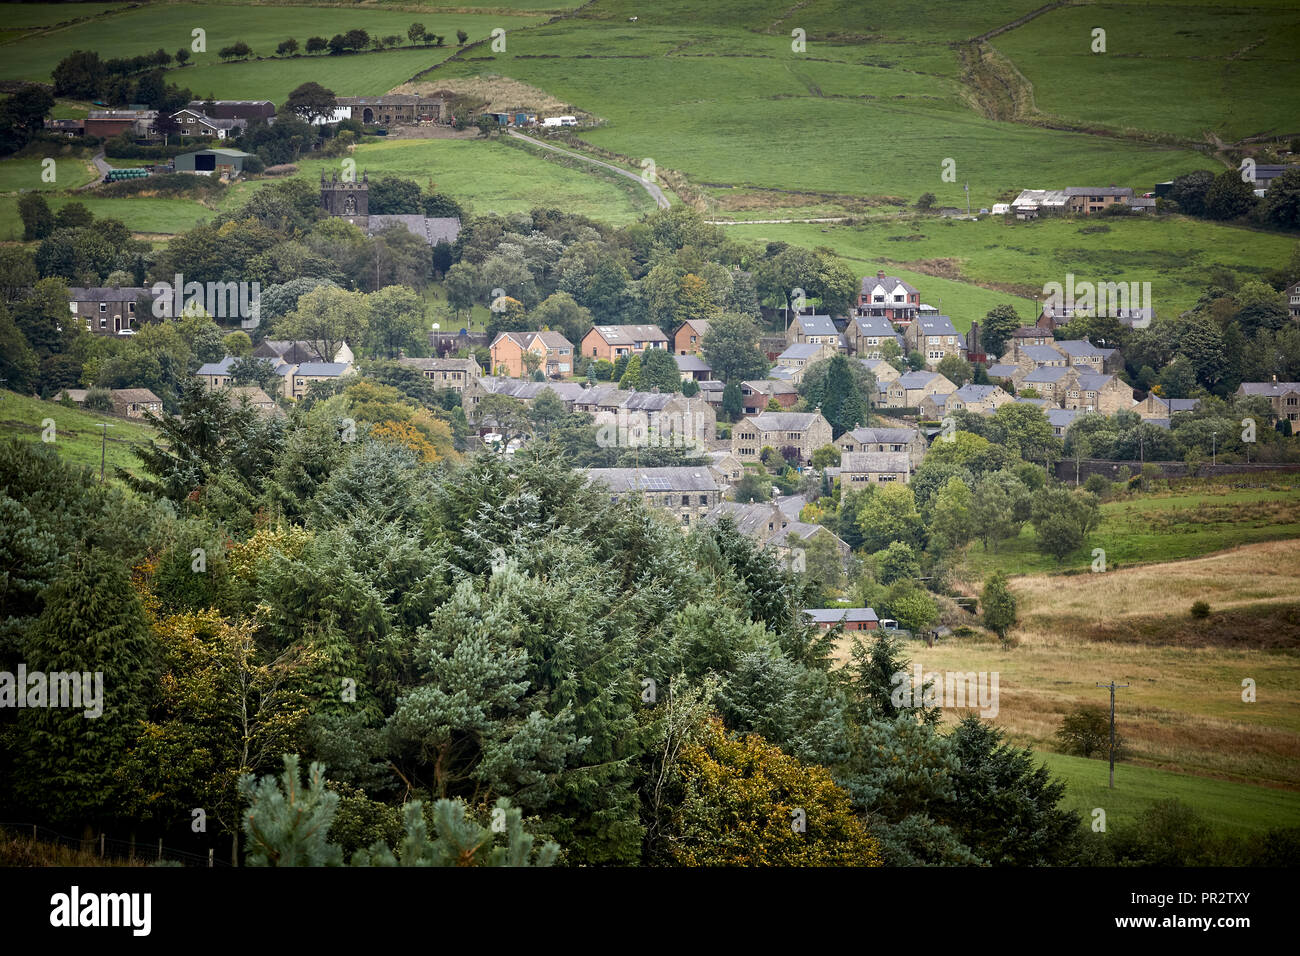 Housing stock in the rural valley village Denshaw in Saddleworth a civil parish of the Metropolitan Borough of Oldham, Greater Manchester, England Stock Photo